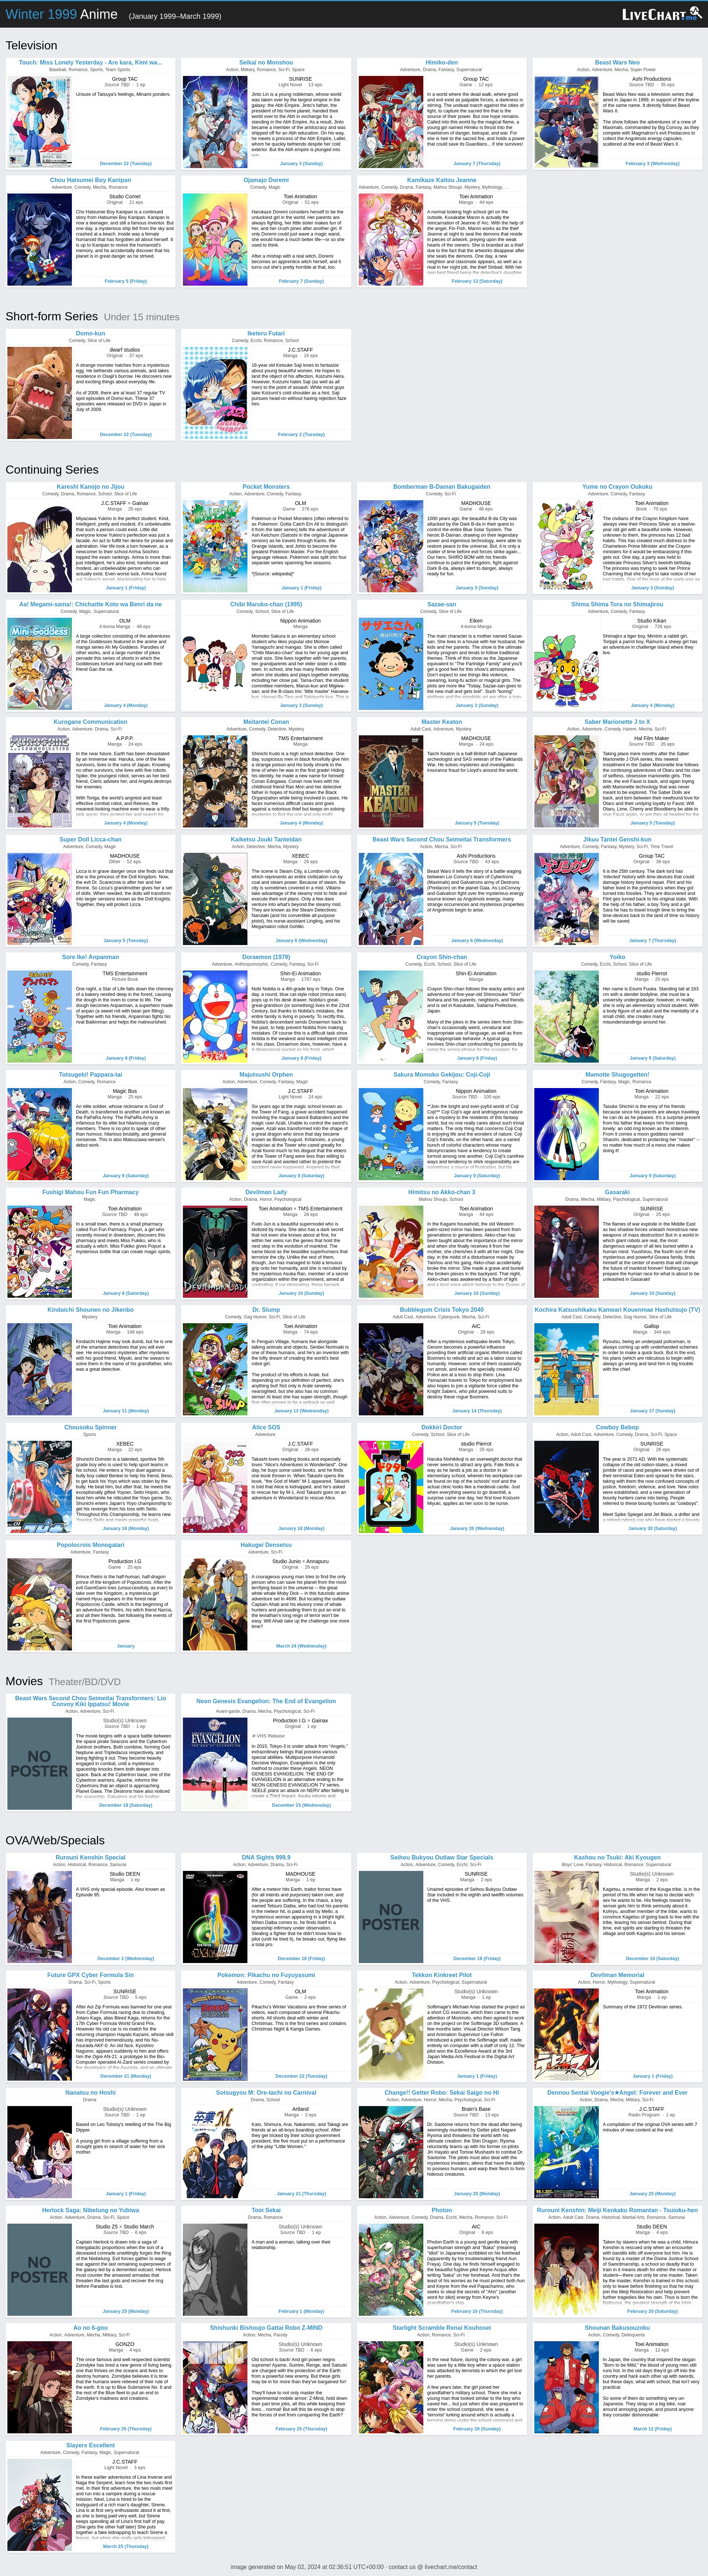 Winter 1999 Anime Chart - Television 